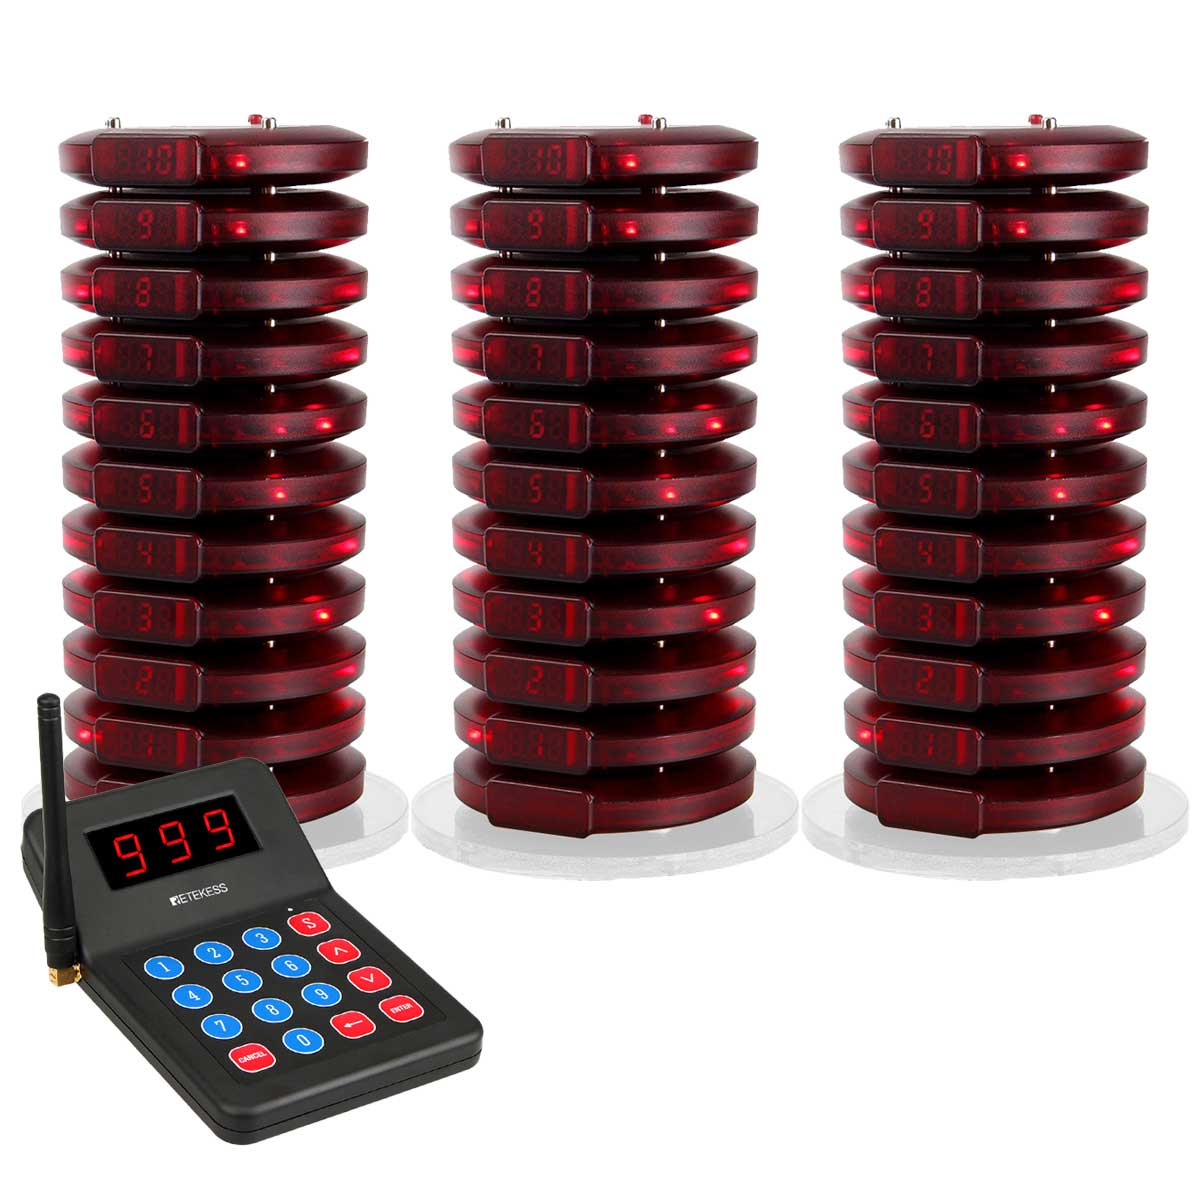 Retekess T119 Restaurant Pager System 1 Keypad 30 Pagers